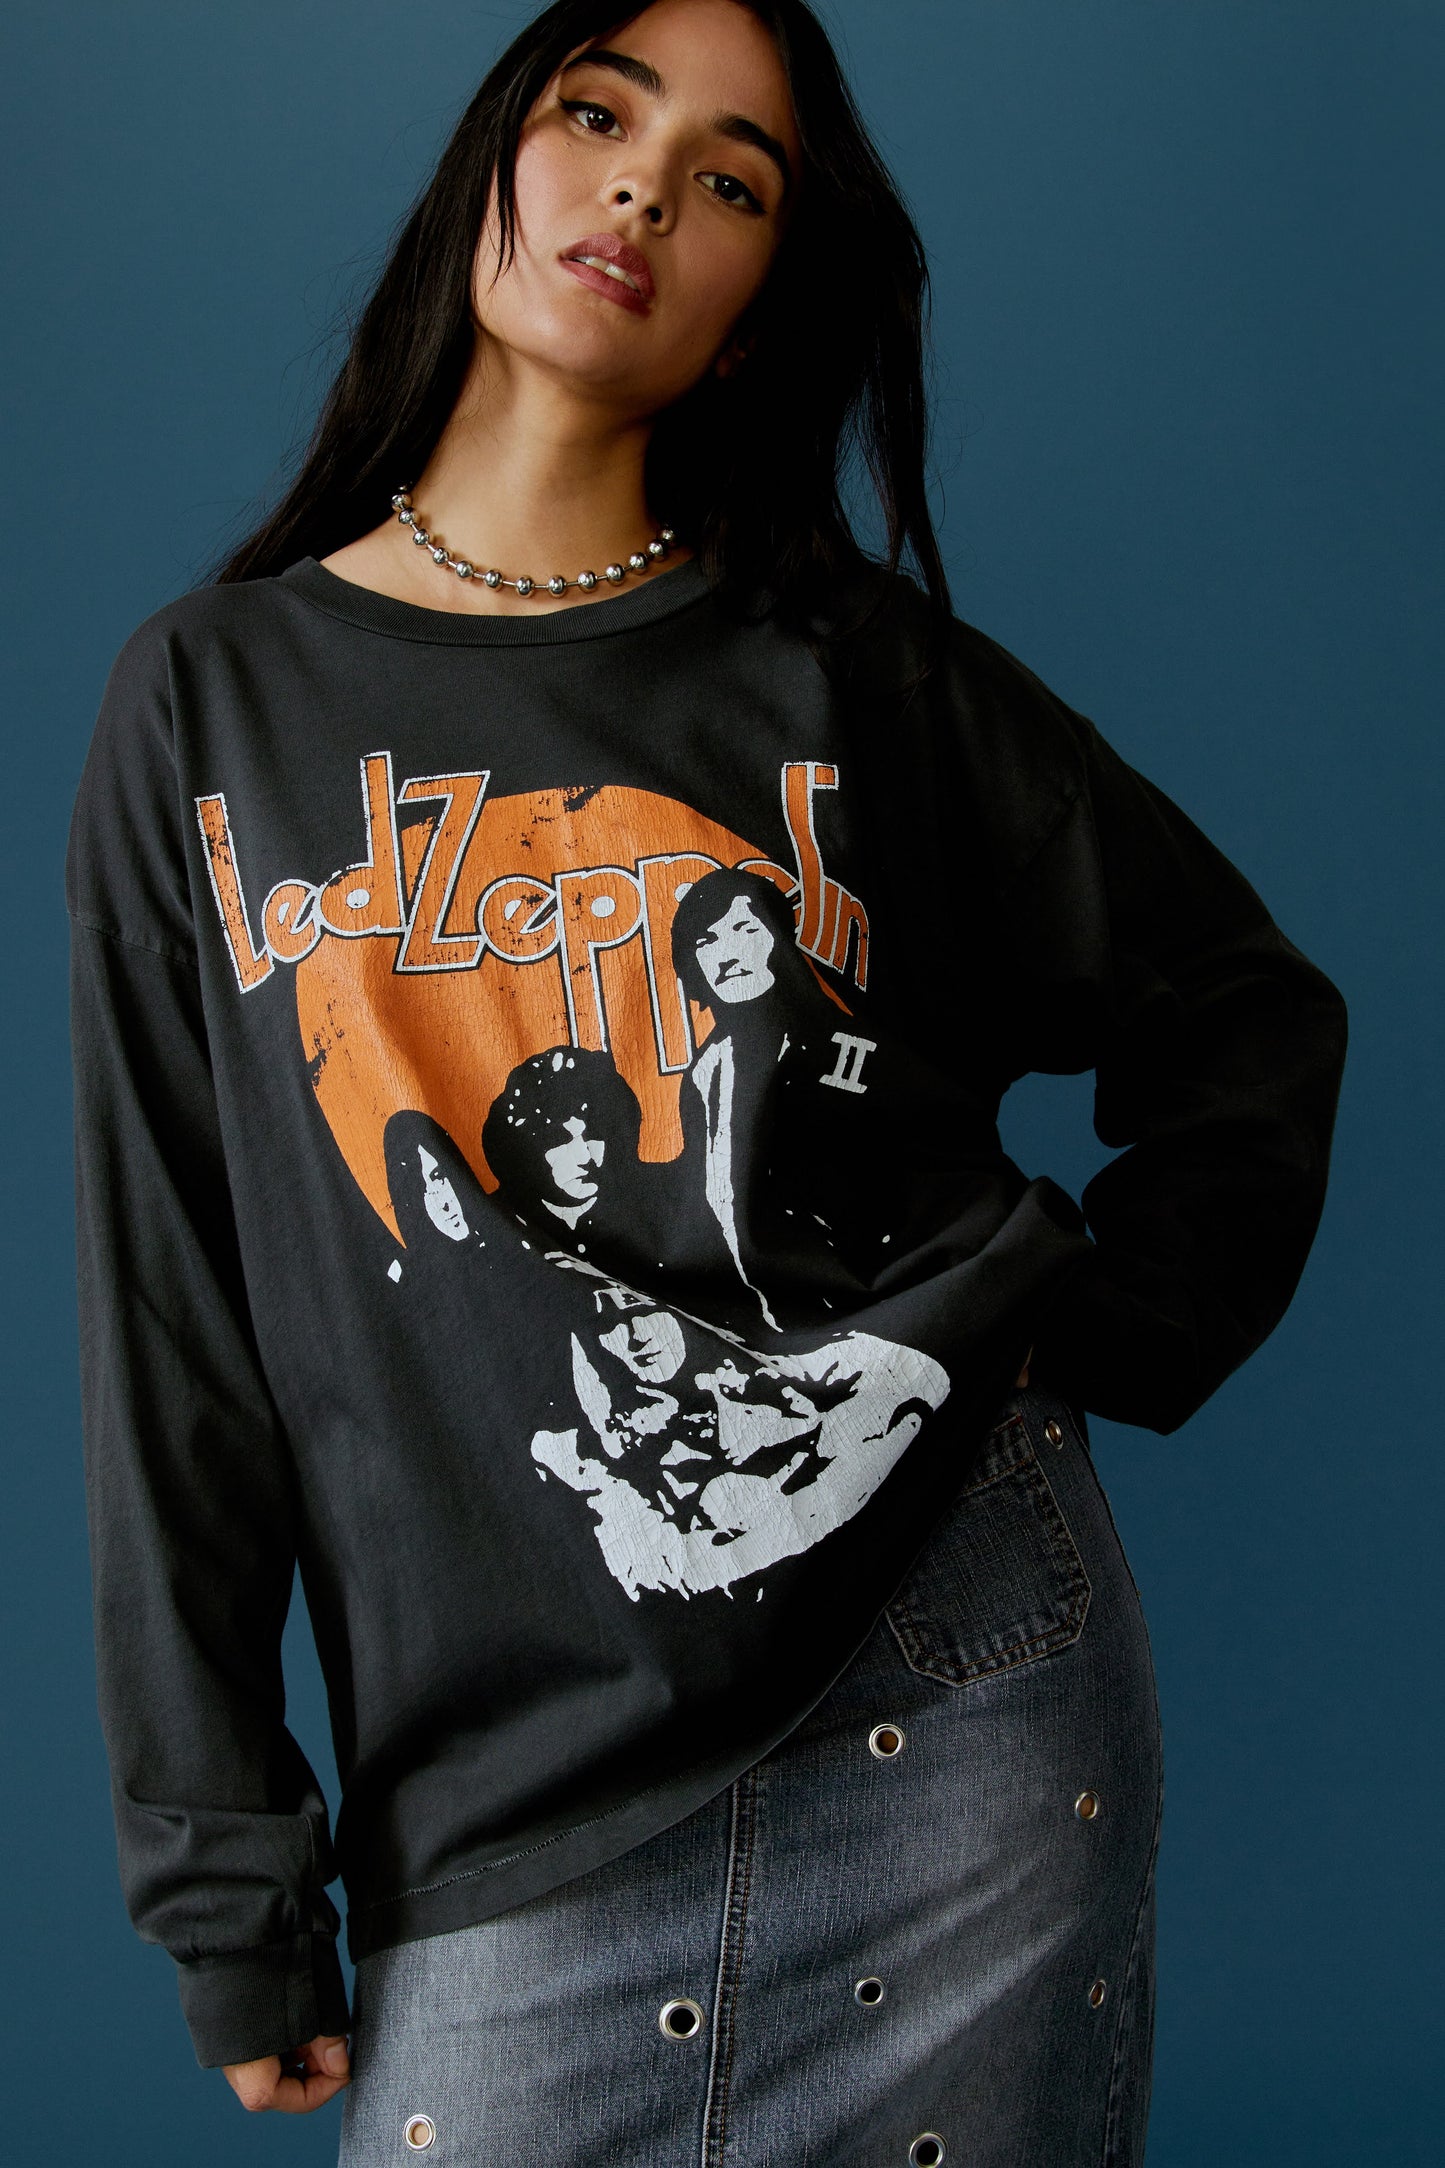 A dark-haired model featuring a black long sleeve stamped with 'Led Zeppelin' in orange, bold letters, and a portrait of each member of the band.